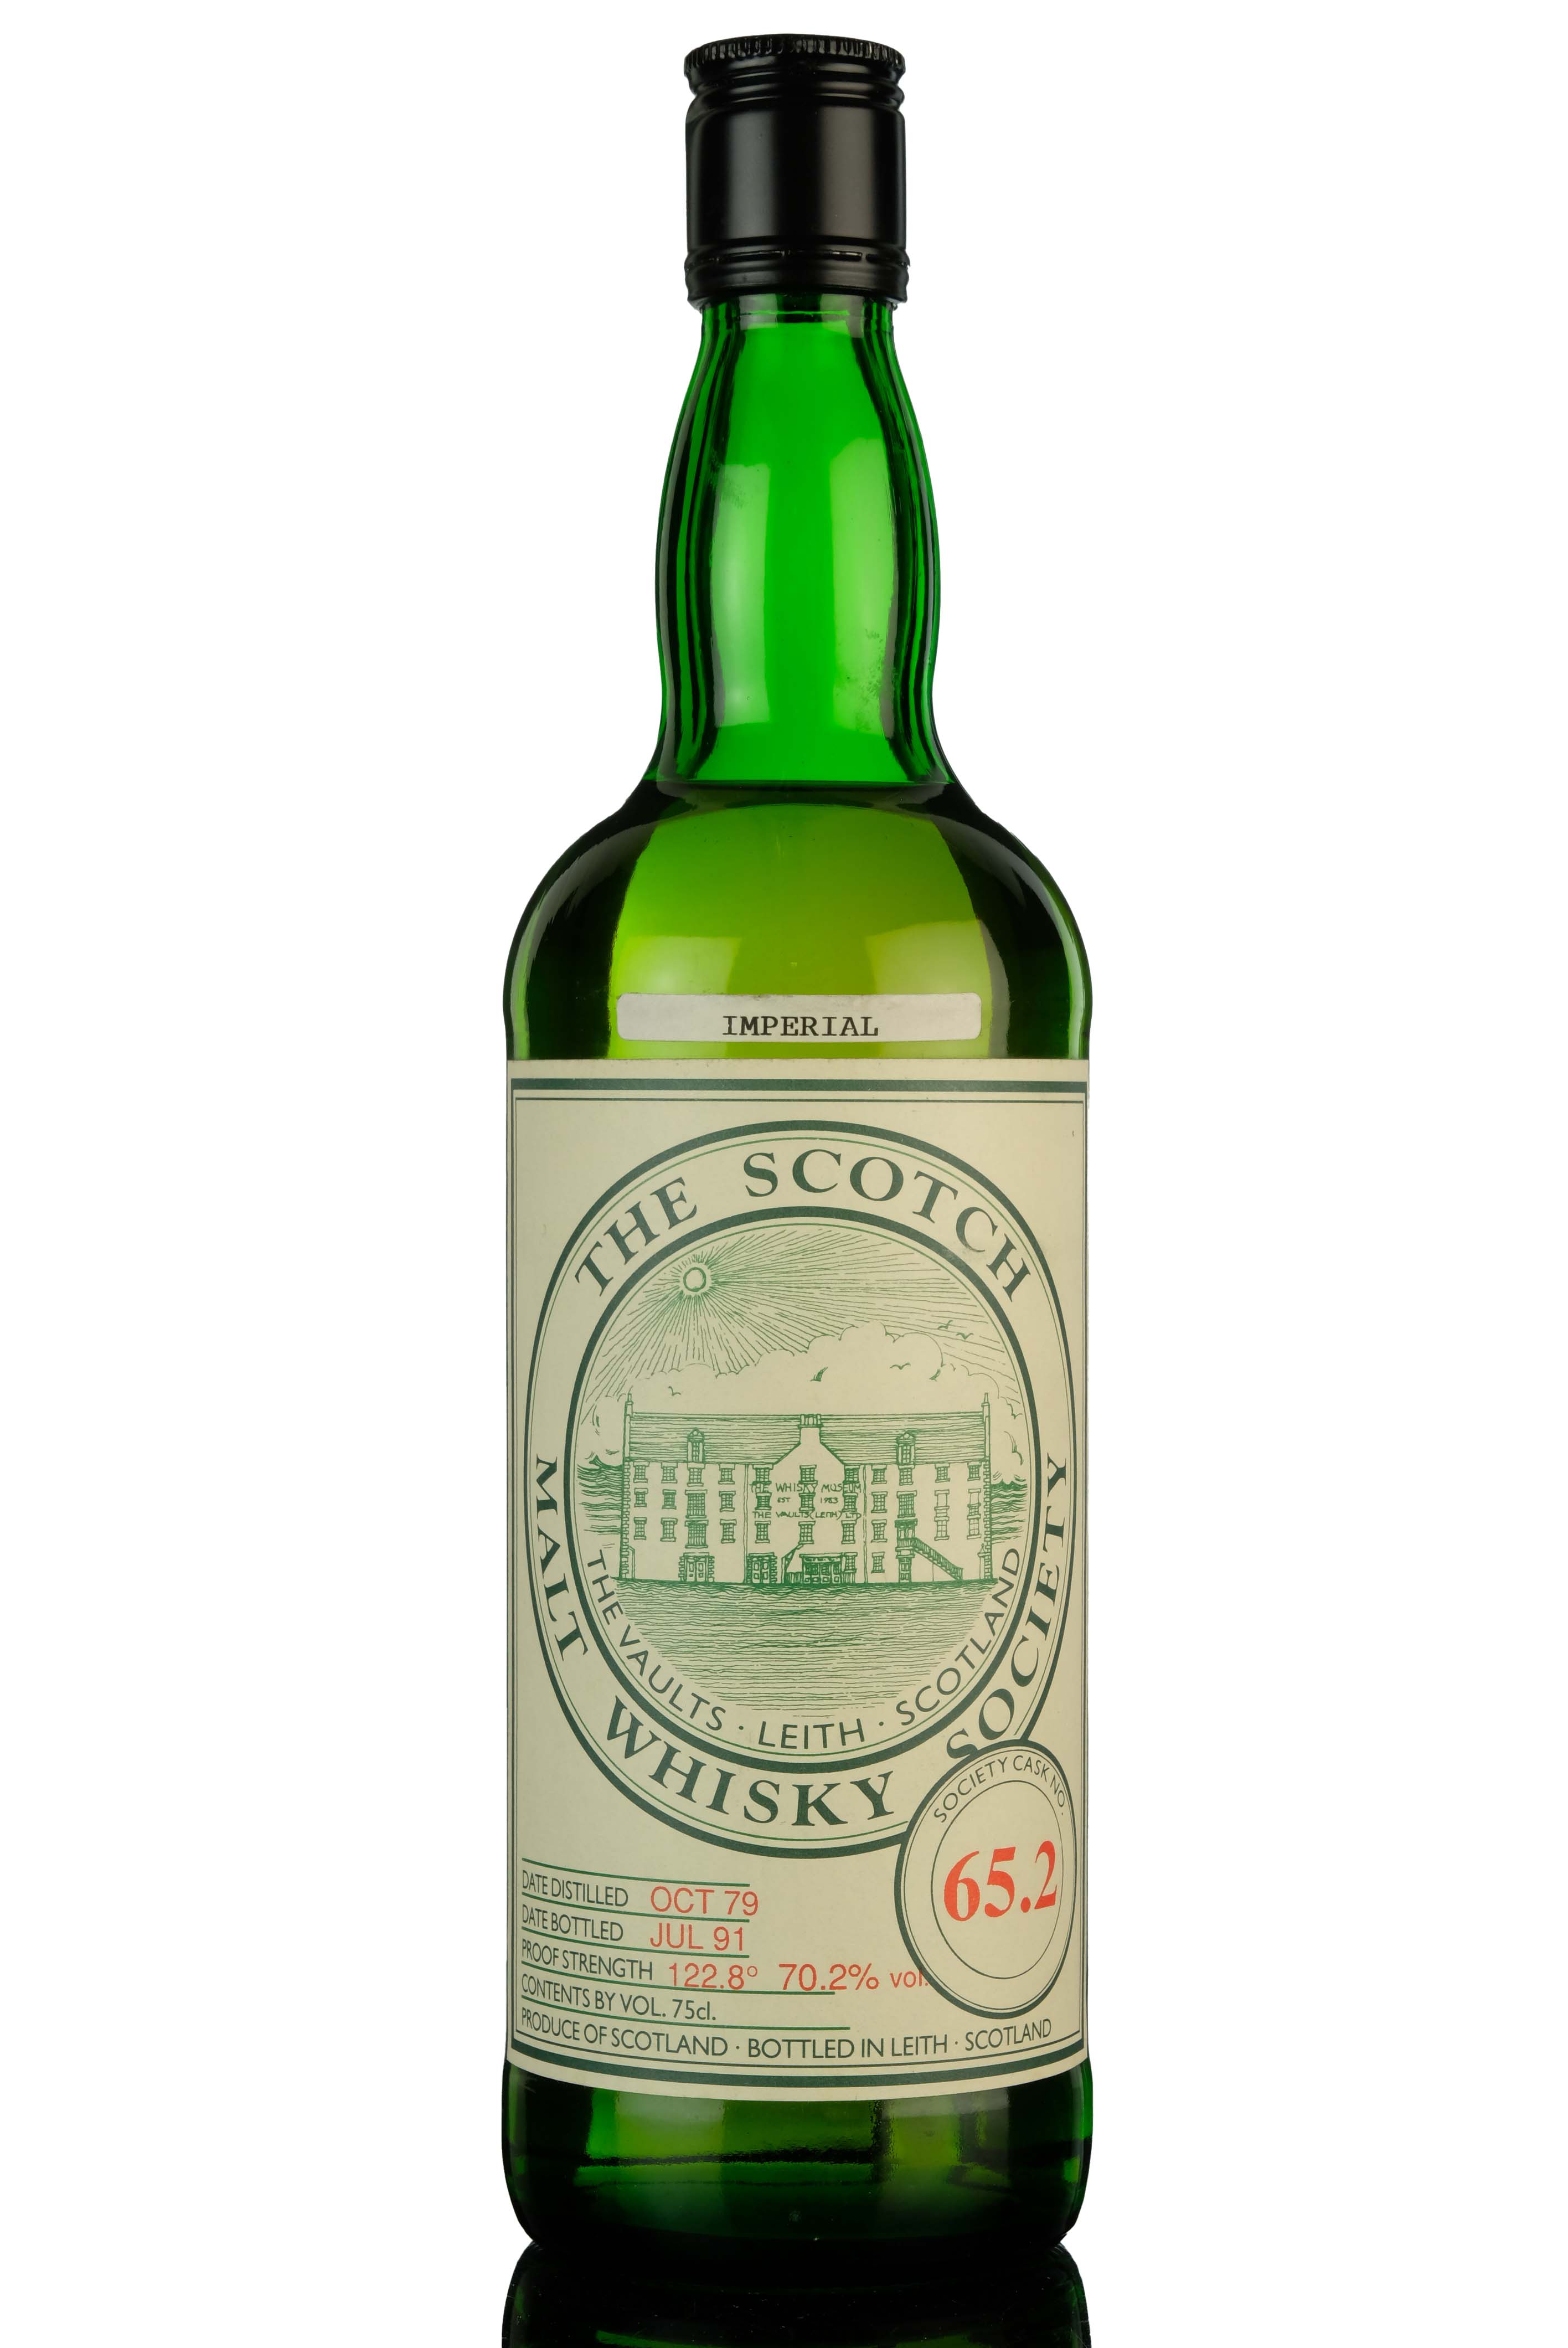 Imperial 1979-1991 - 11 Year Old - SMWS 65.2